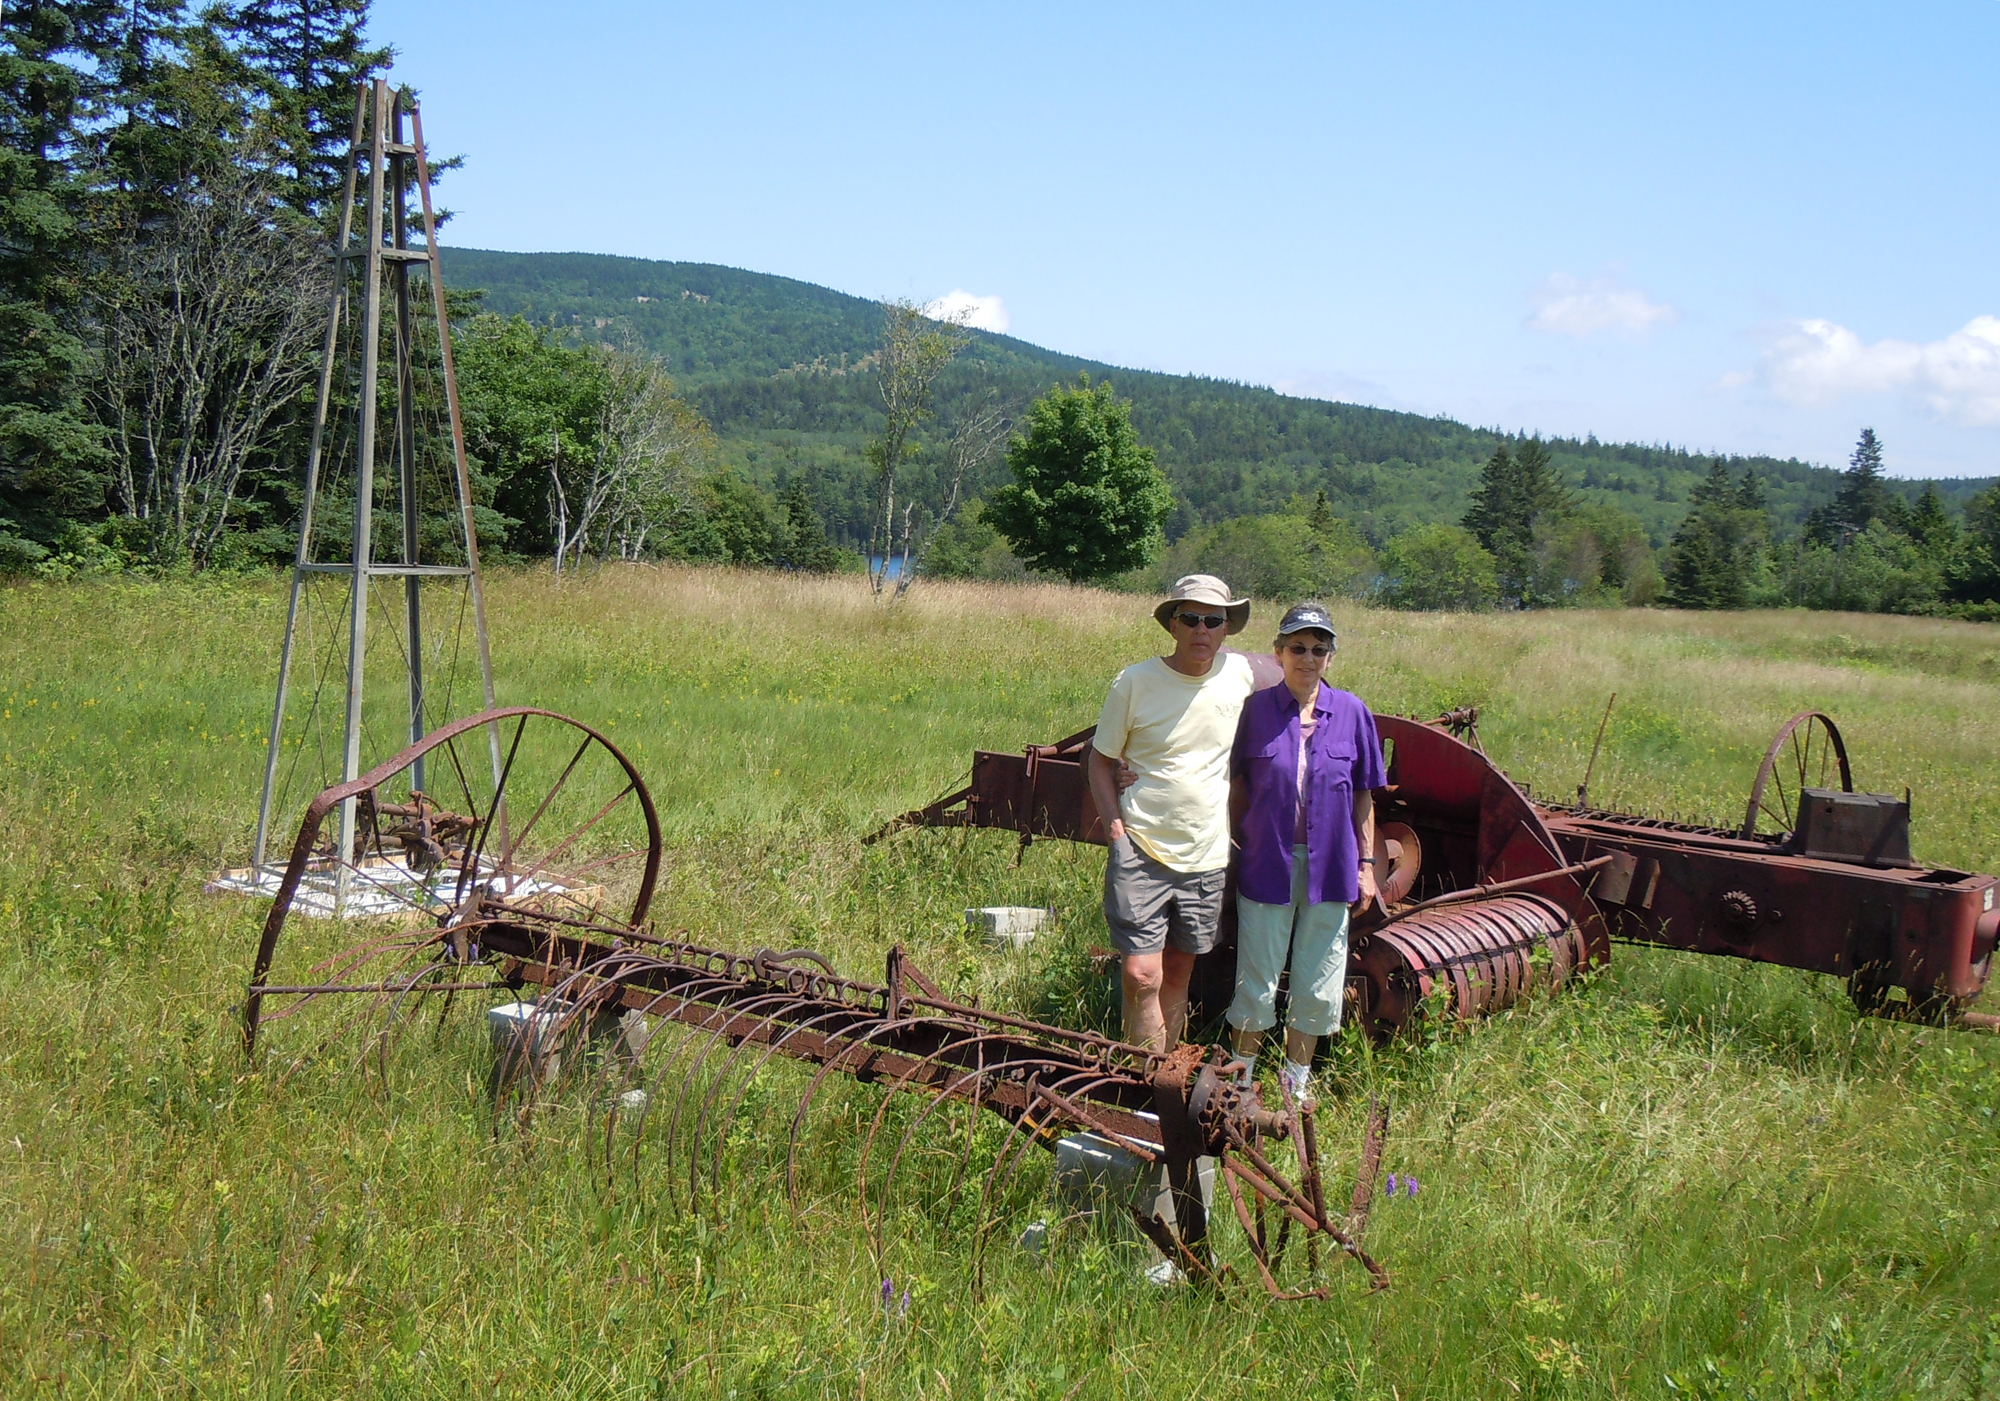 Display Of Old Farm Equipment (user submitted)